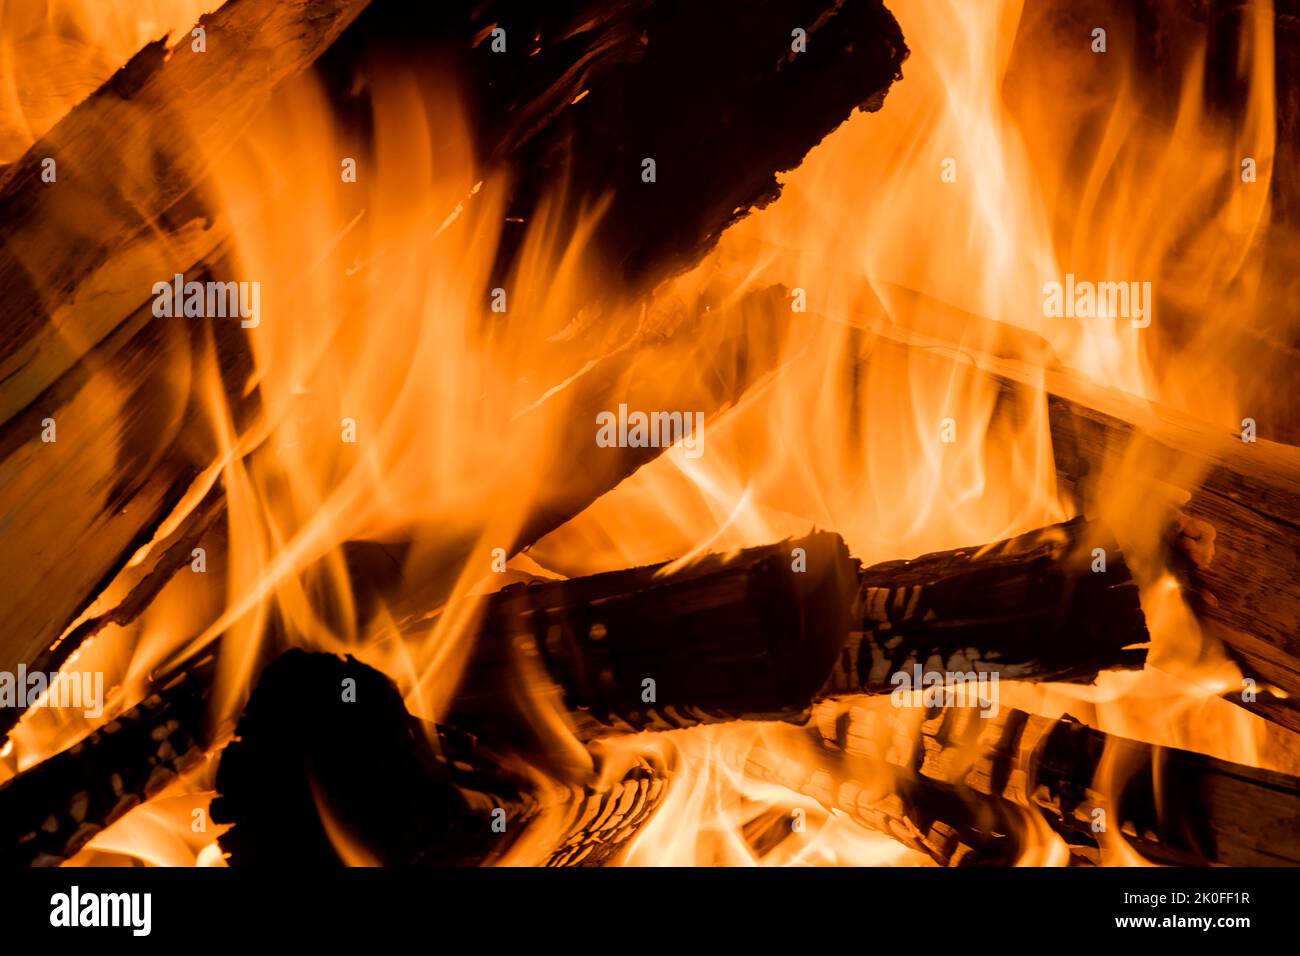 Fire with flame is burning in the wood-fired pizza oven Stock Photo